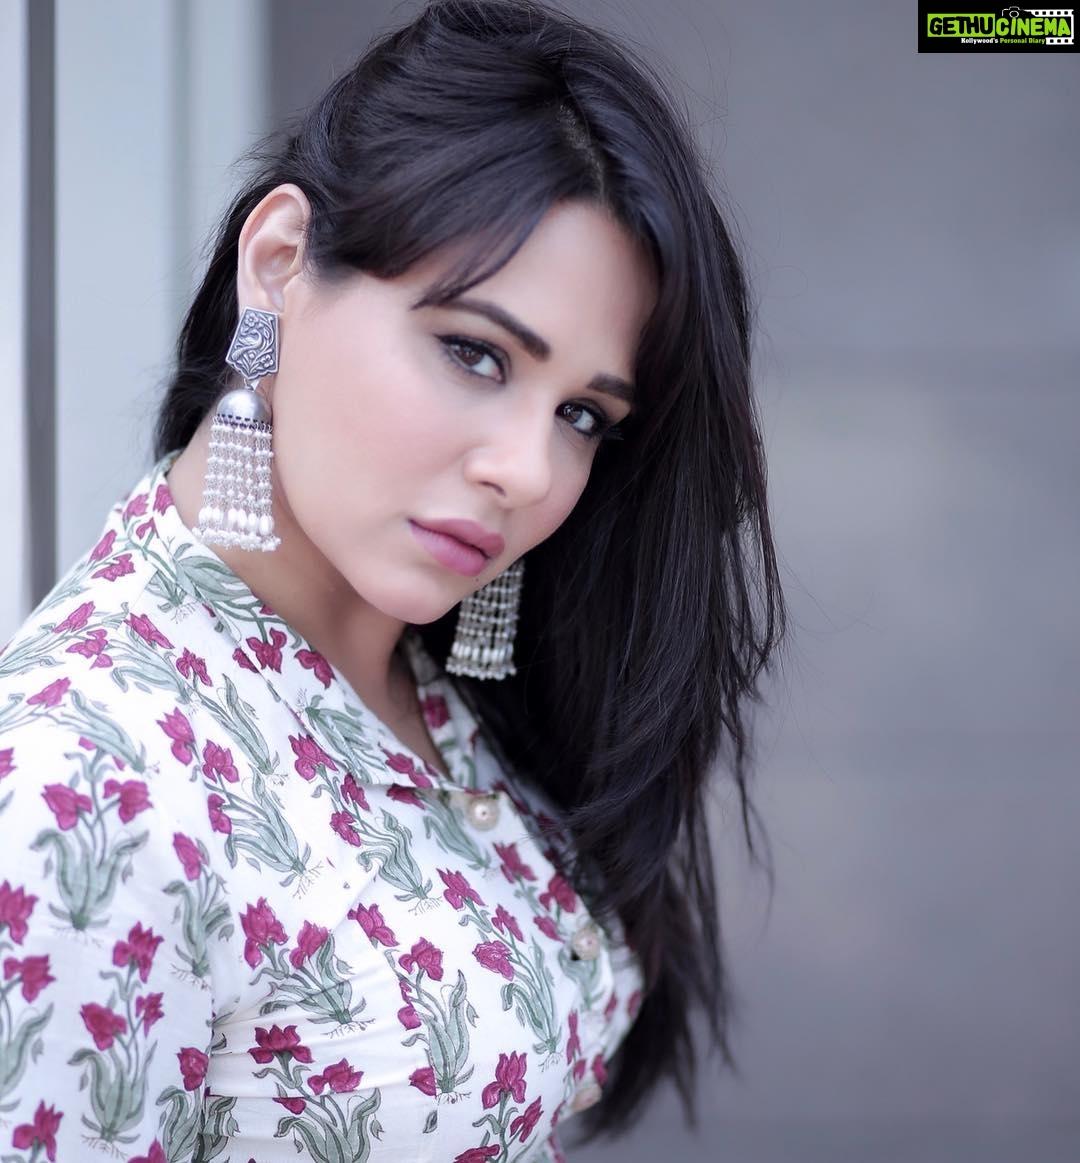 Mandy Takhar Sex Hd Video - Actress Mandy Takhar Instagram Photos and Posts May 2018 - Gethu Cinema